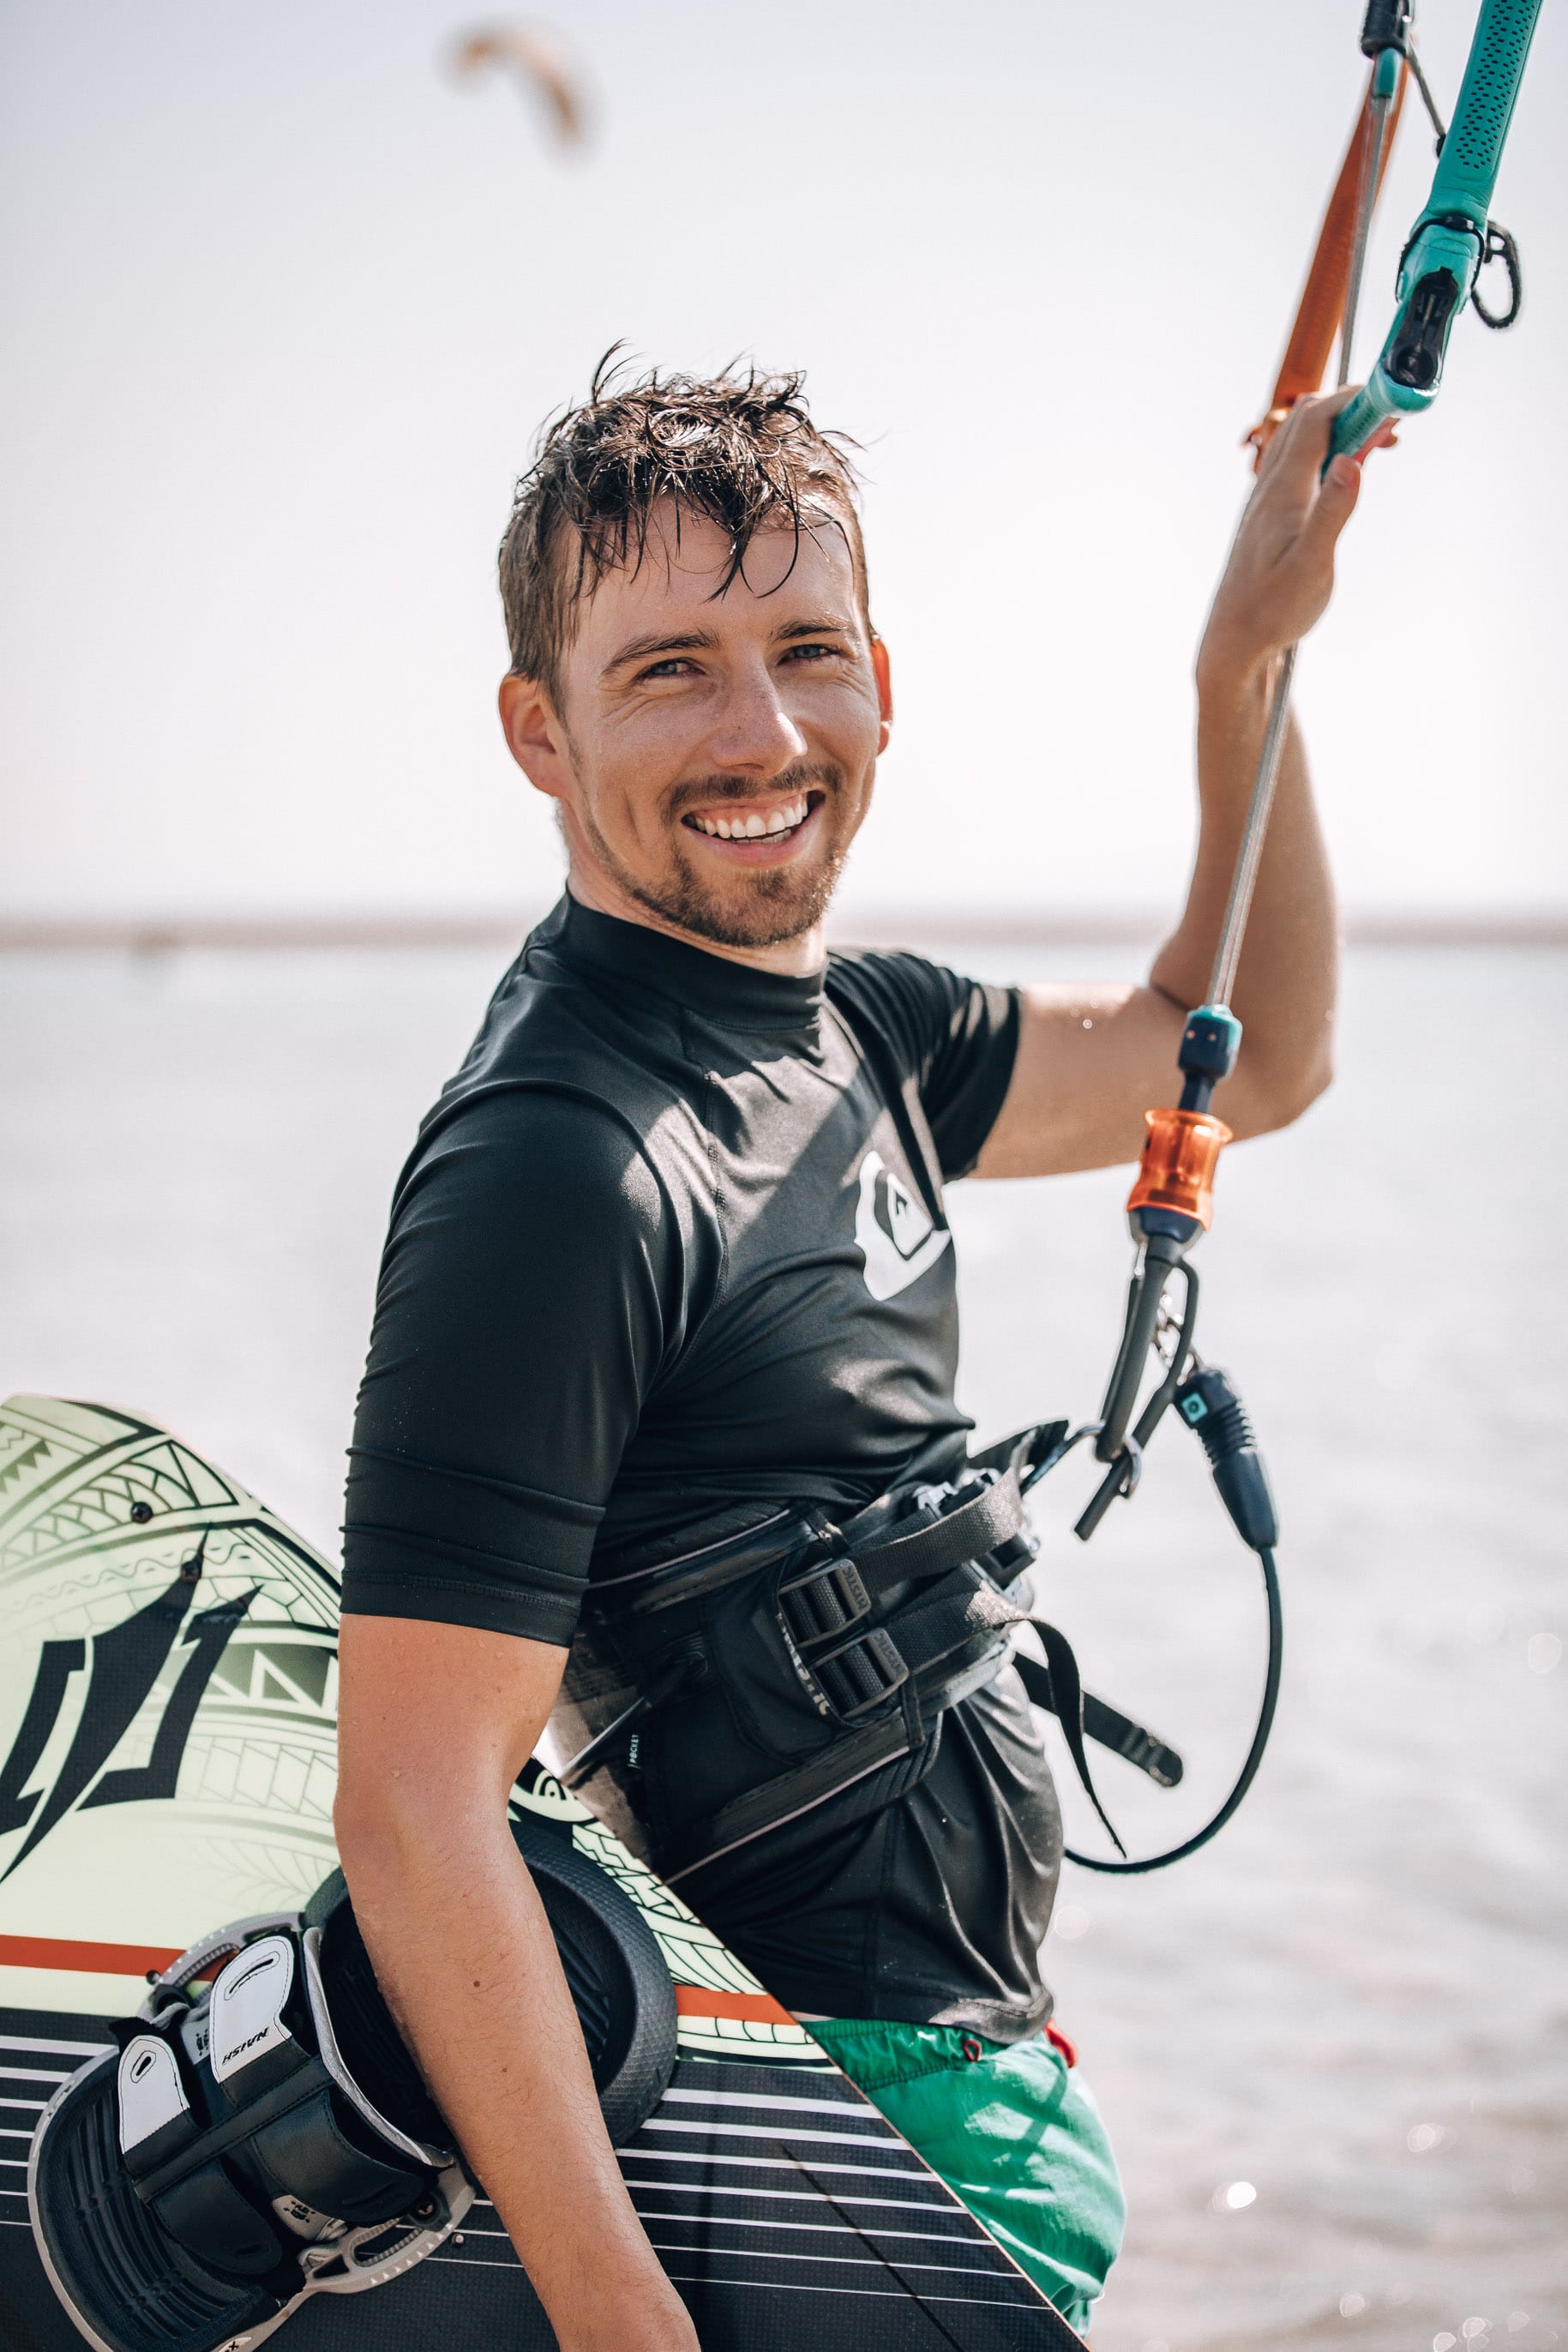 A picture of me smiling at the camera controling the kite with one hand on the bar, and another hand holding a kiteboard.